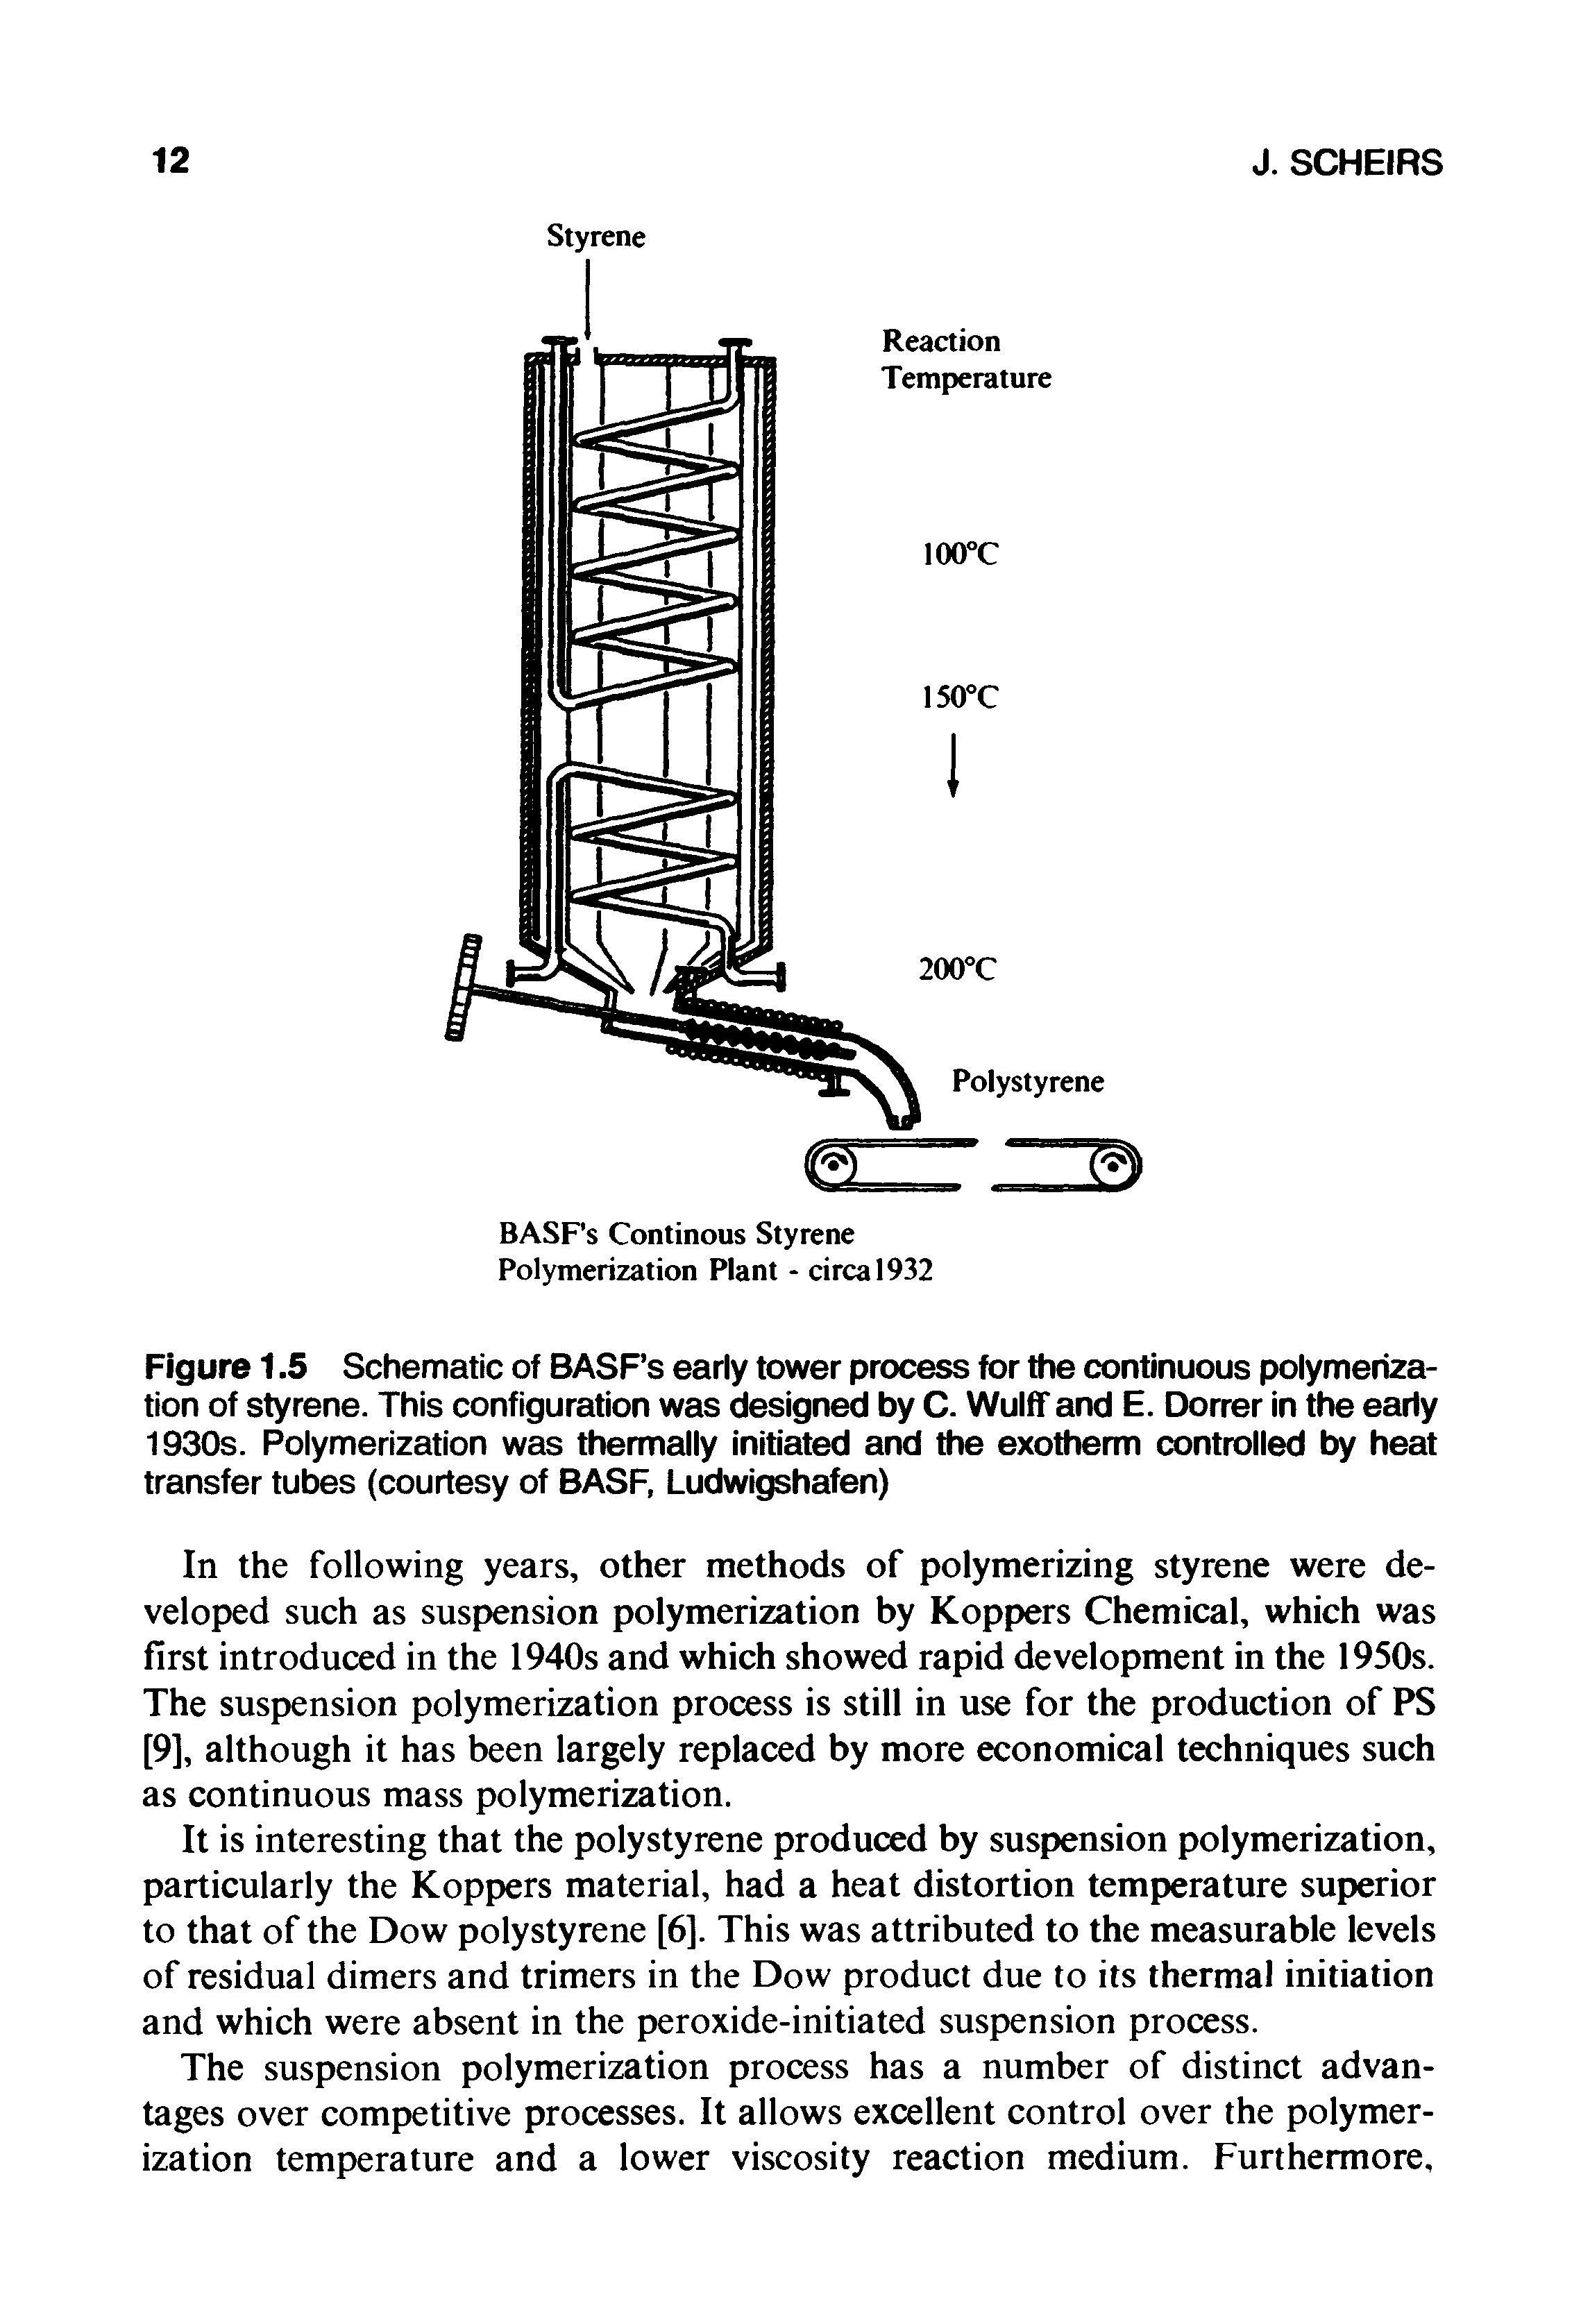 Figure 1.5 Schematic of BASF s early tower process for the continuous polymerization of styrene. This configuration was designed by C. Wulff and E. Dorrer in the early 1930s. Polymerization was thermally initiated and the exotherm controlled by heat transfer tubes (courtesy of BASF, Ludwigshafen)...